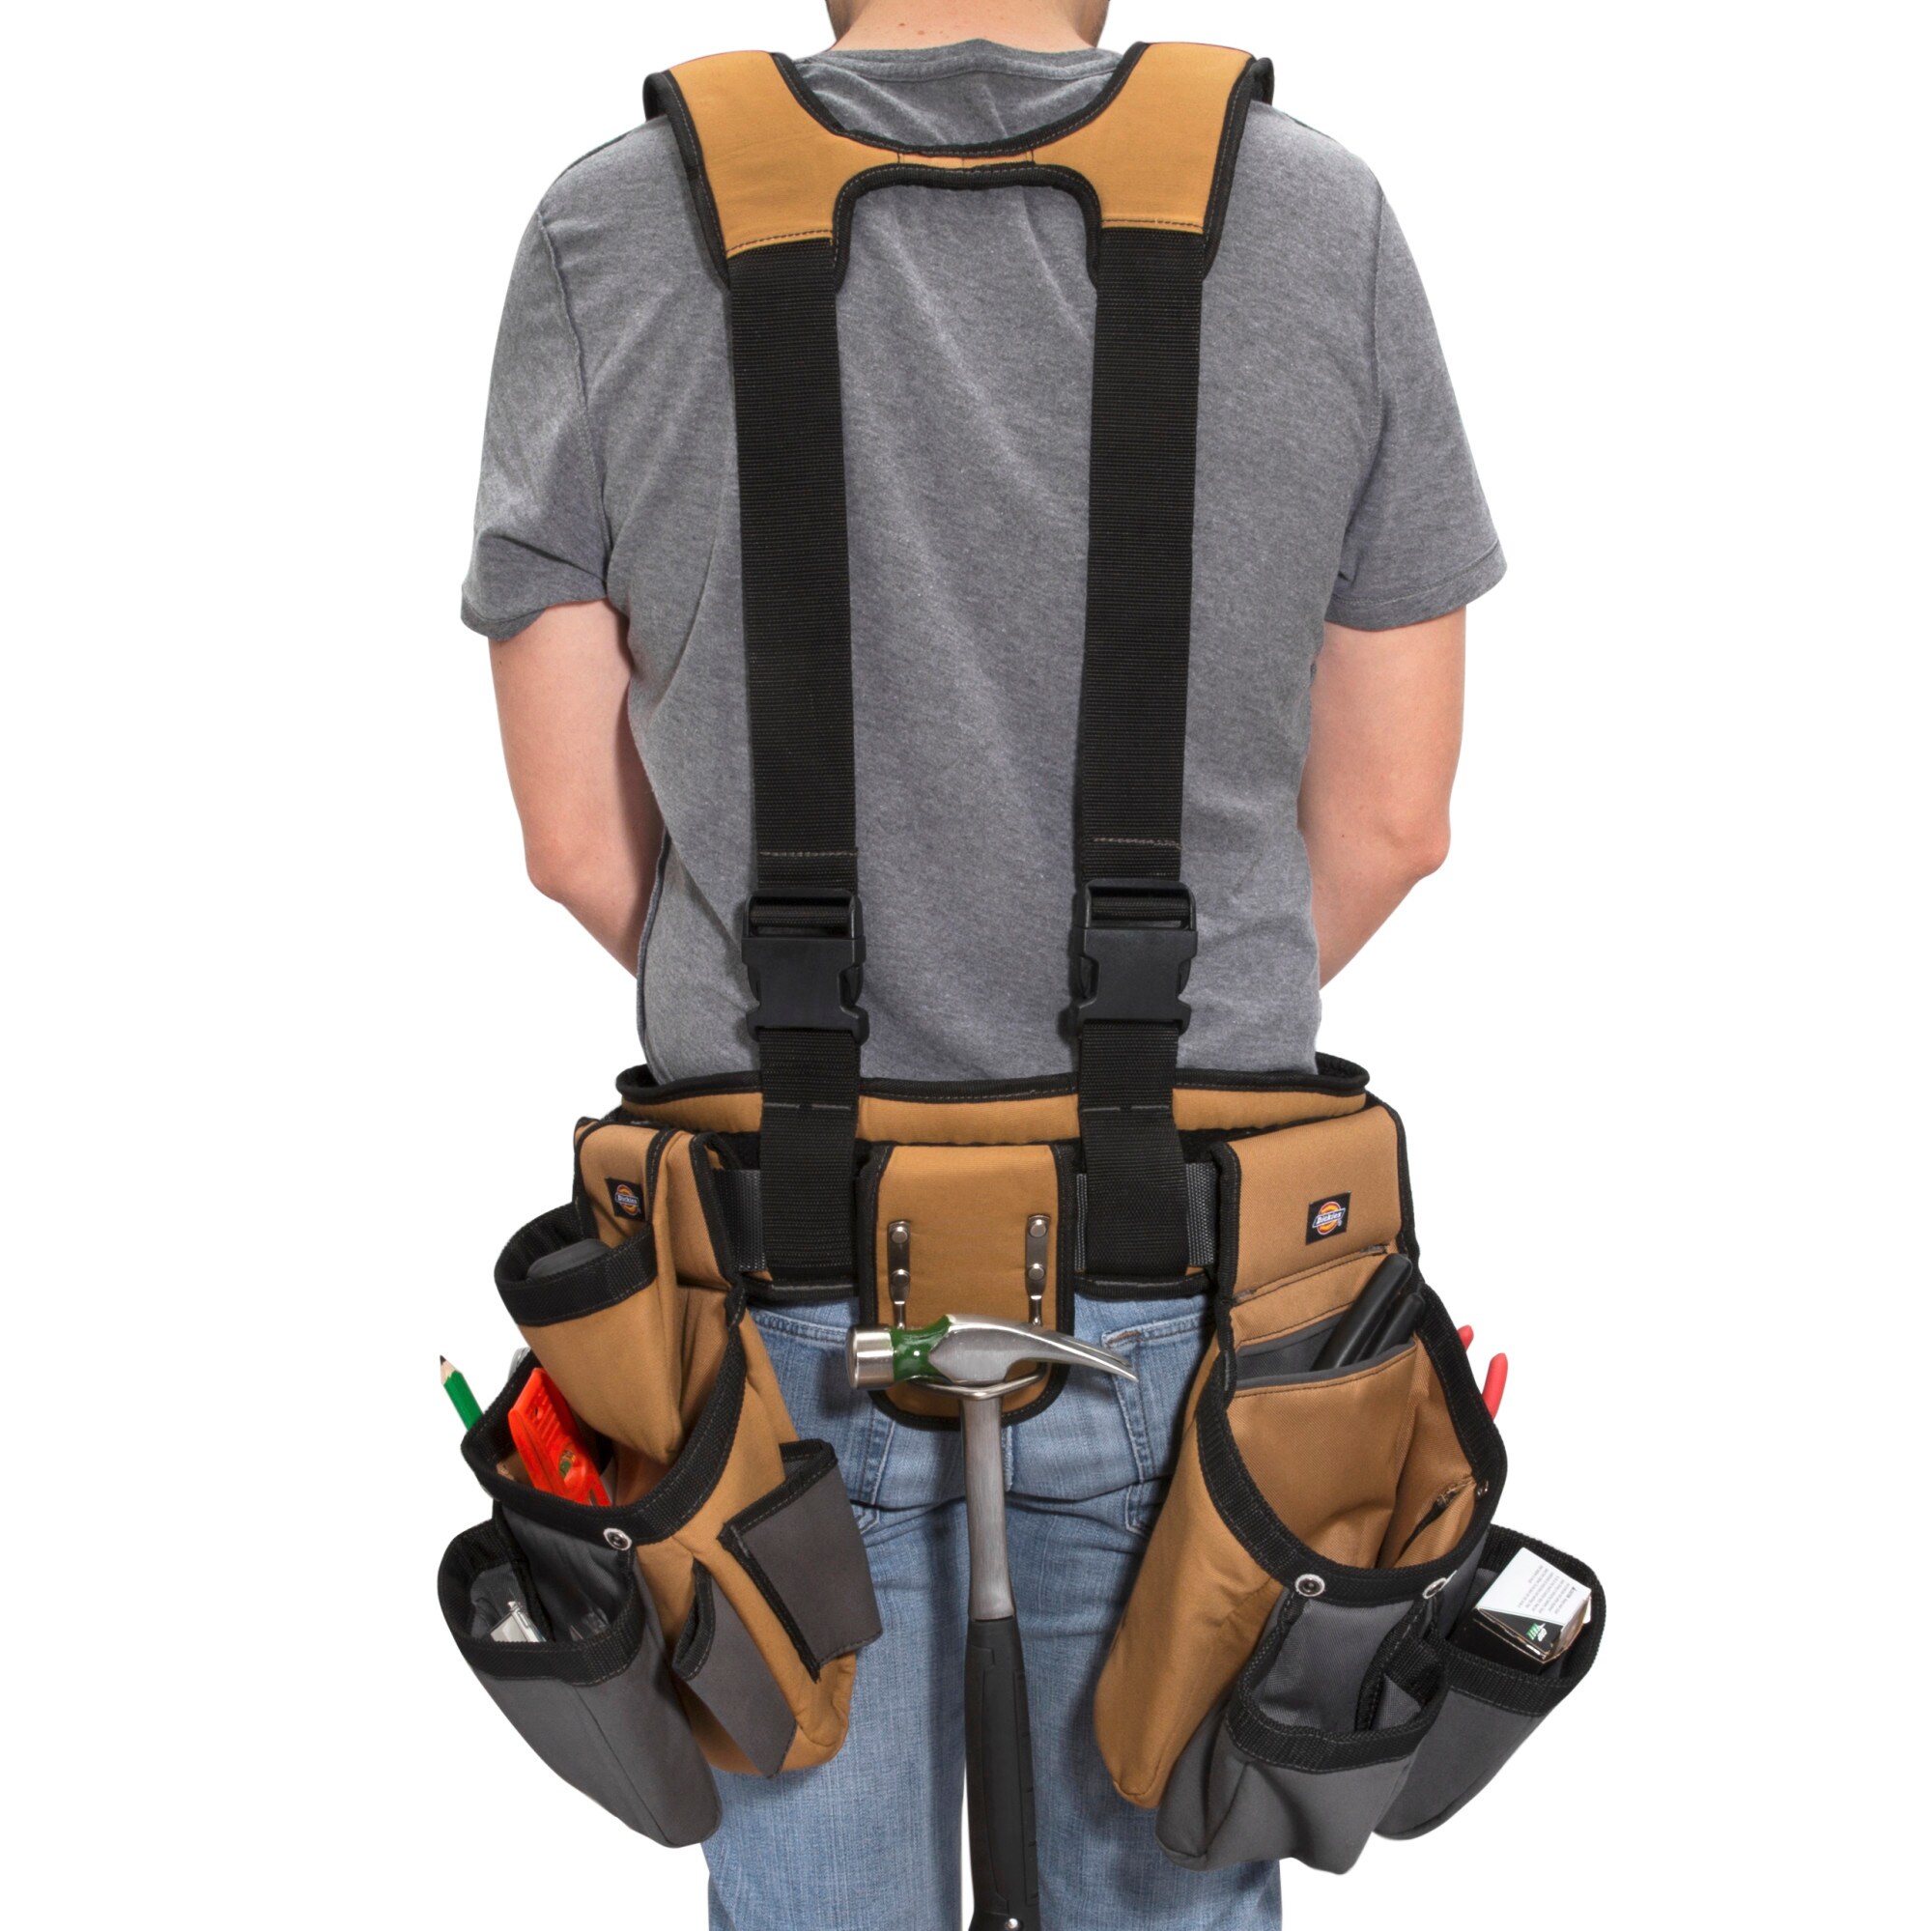 Dickies Carpenter Canvas Tool Rig in the Tool Belts department at Lowes.com